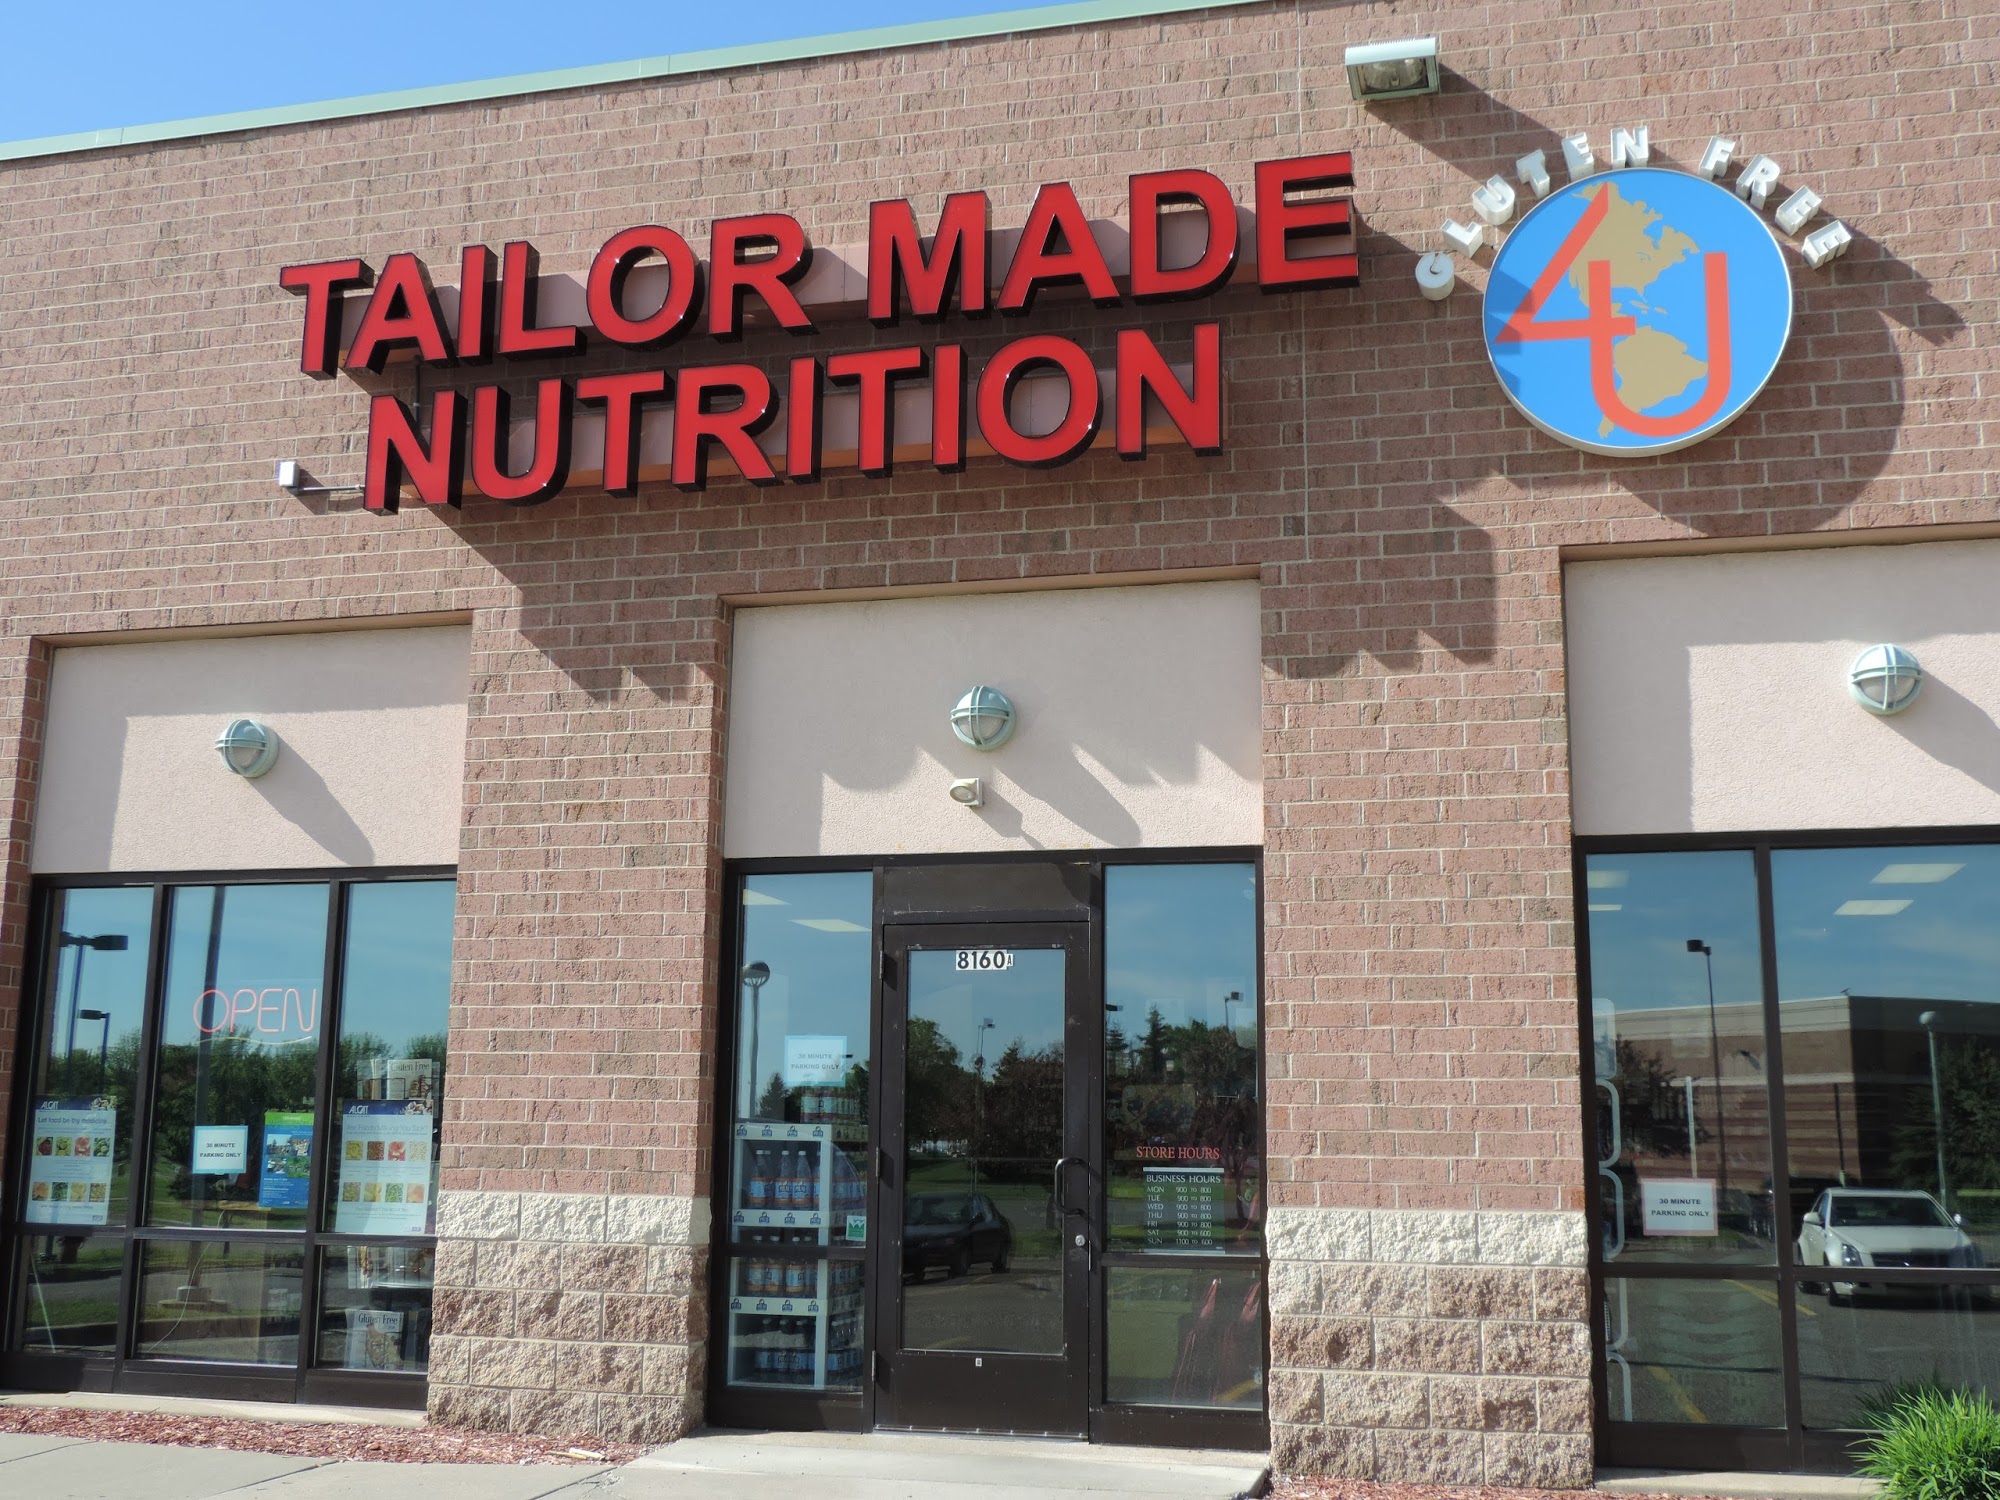 Tailor Made Nutrition